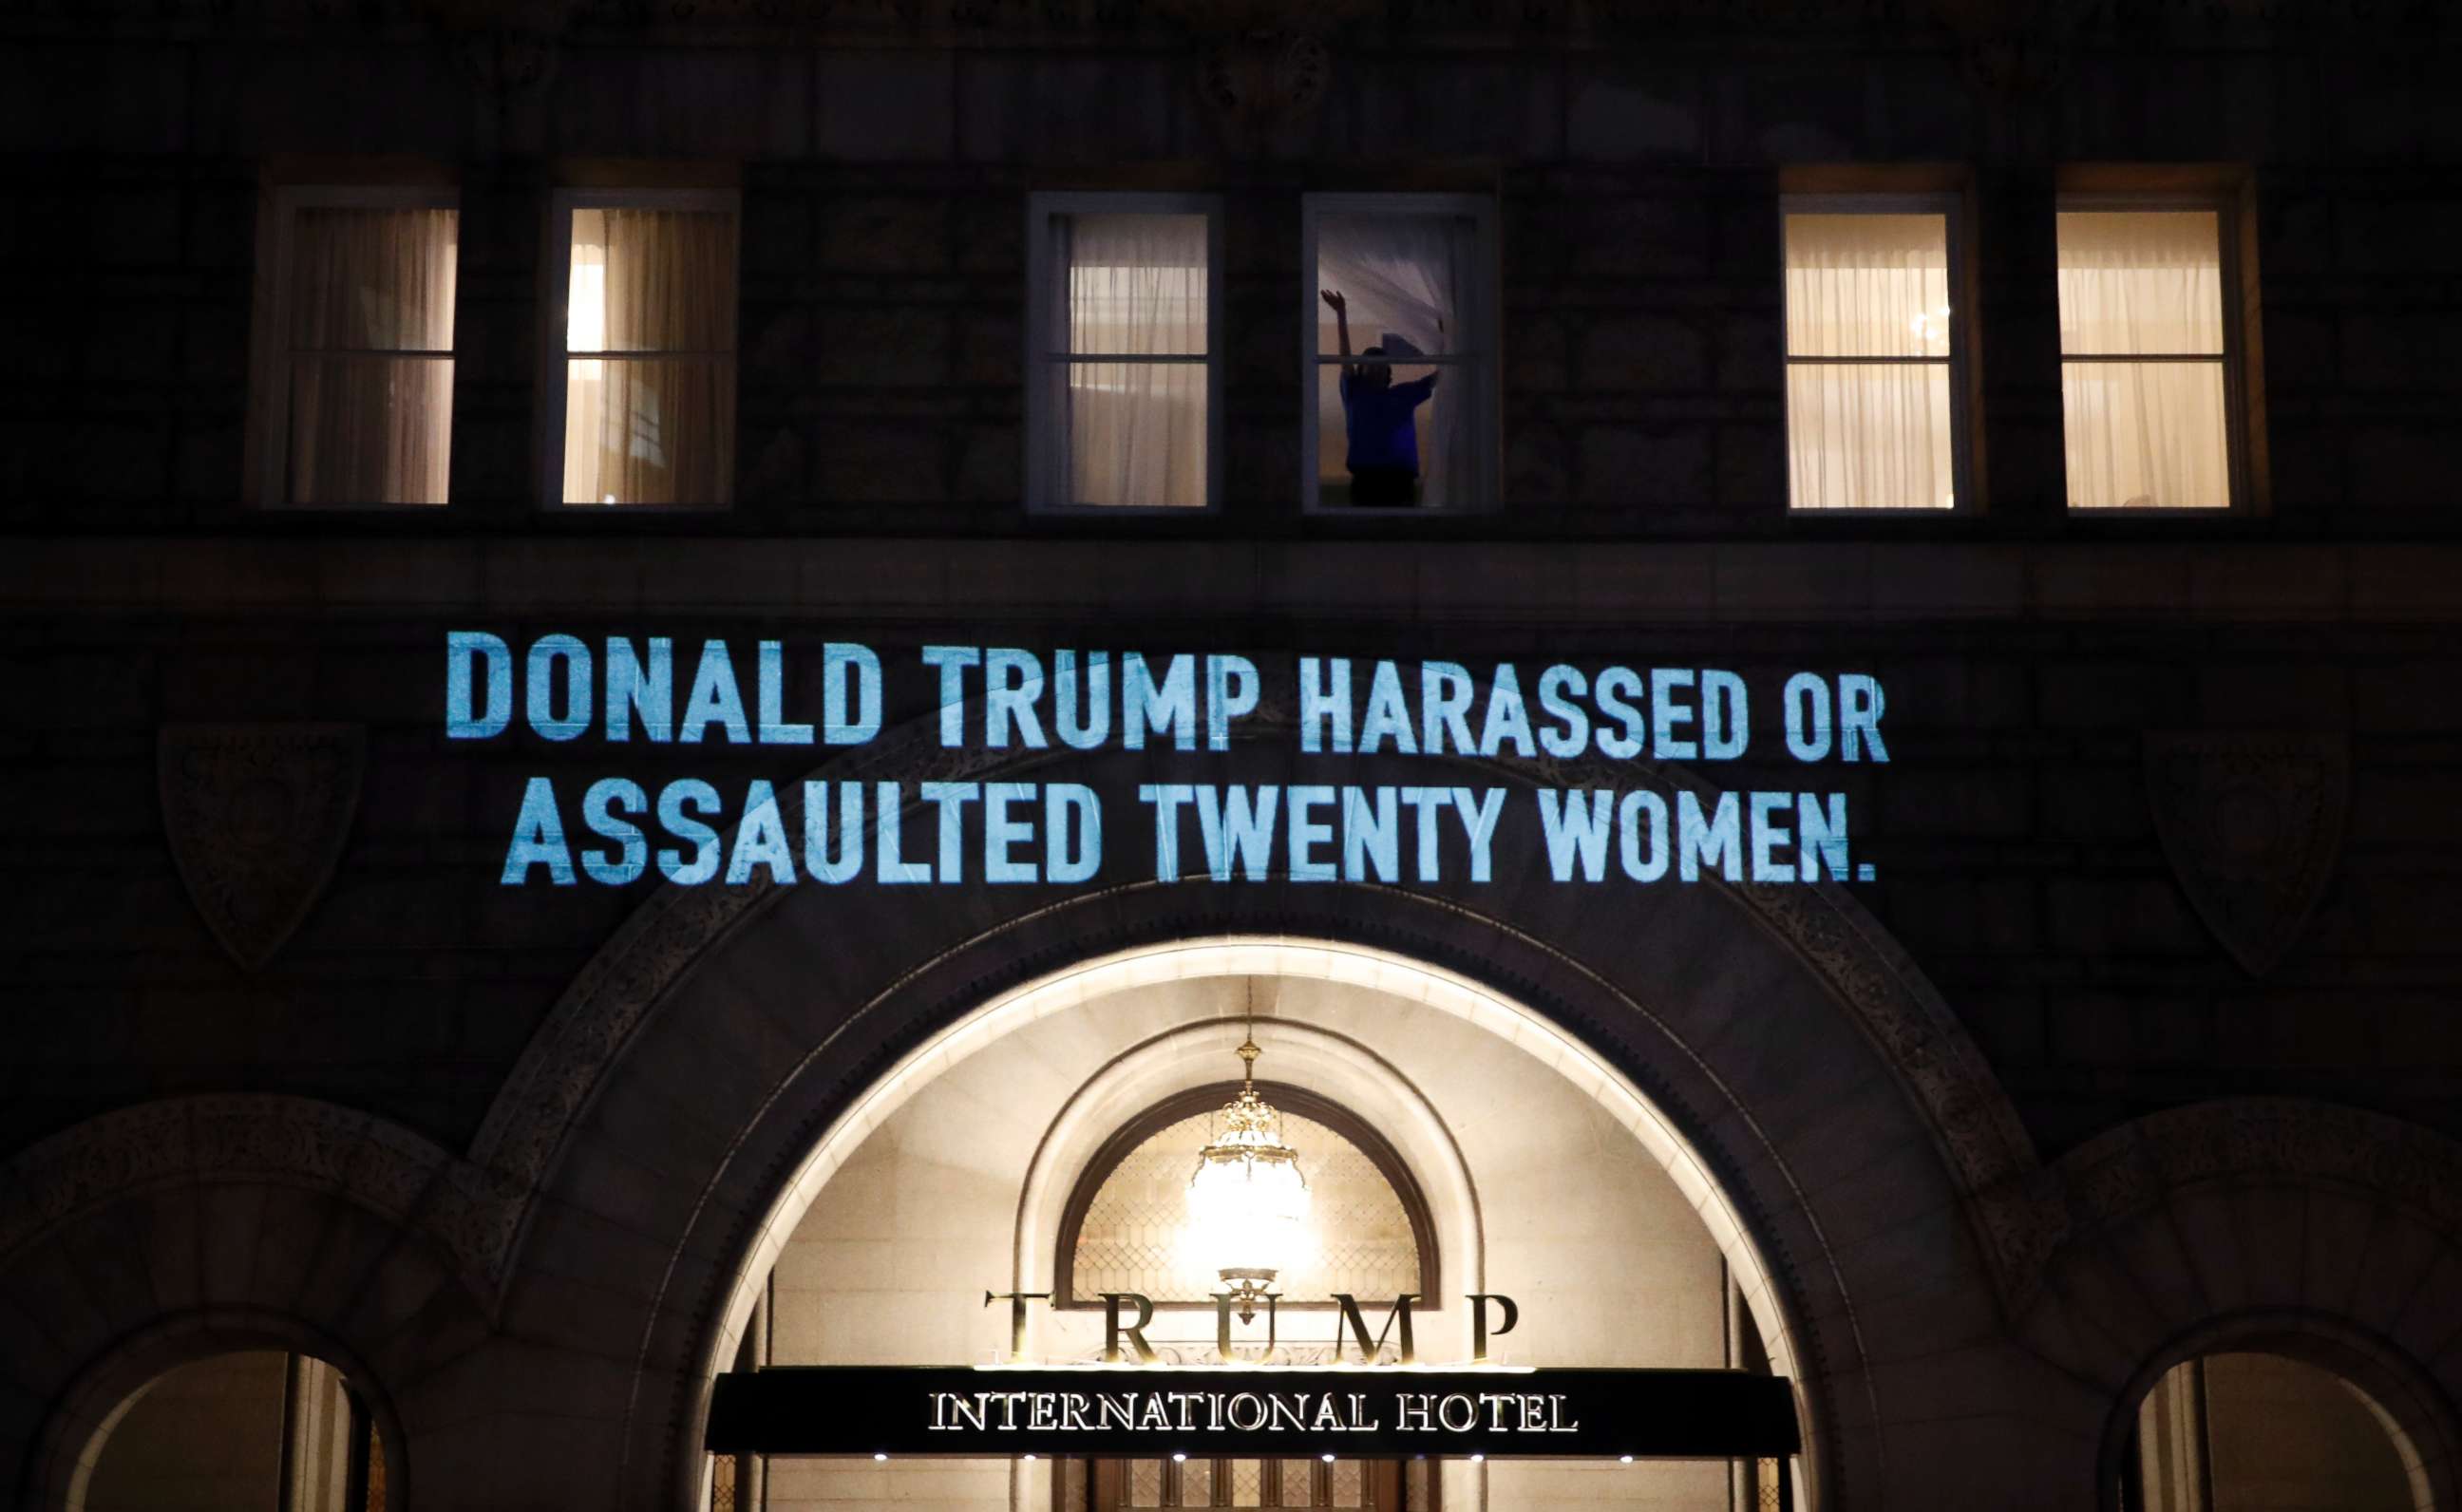 PHOTO: A person waves from a window as UltraViolet, a national women's group, projects a message on the 12th Street side of the Trump International Hotel before President Donald Trump gives his State of the Union Address, Jan. 30, 2018, in Washington.